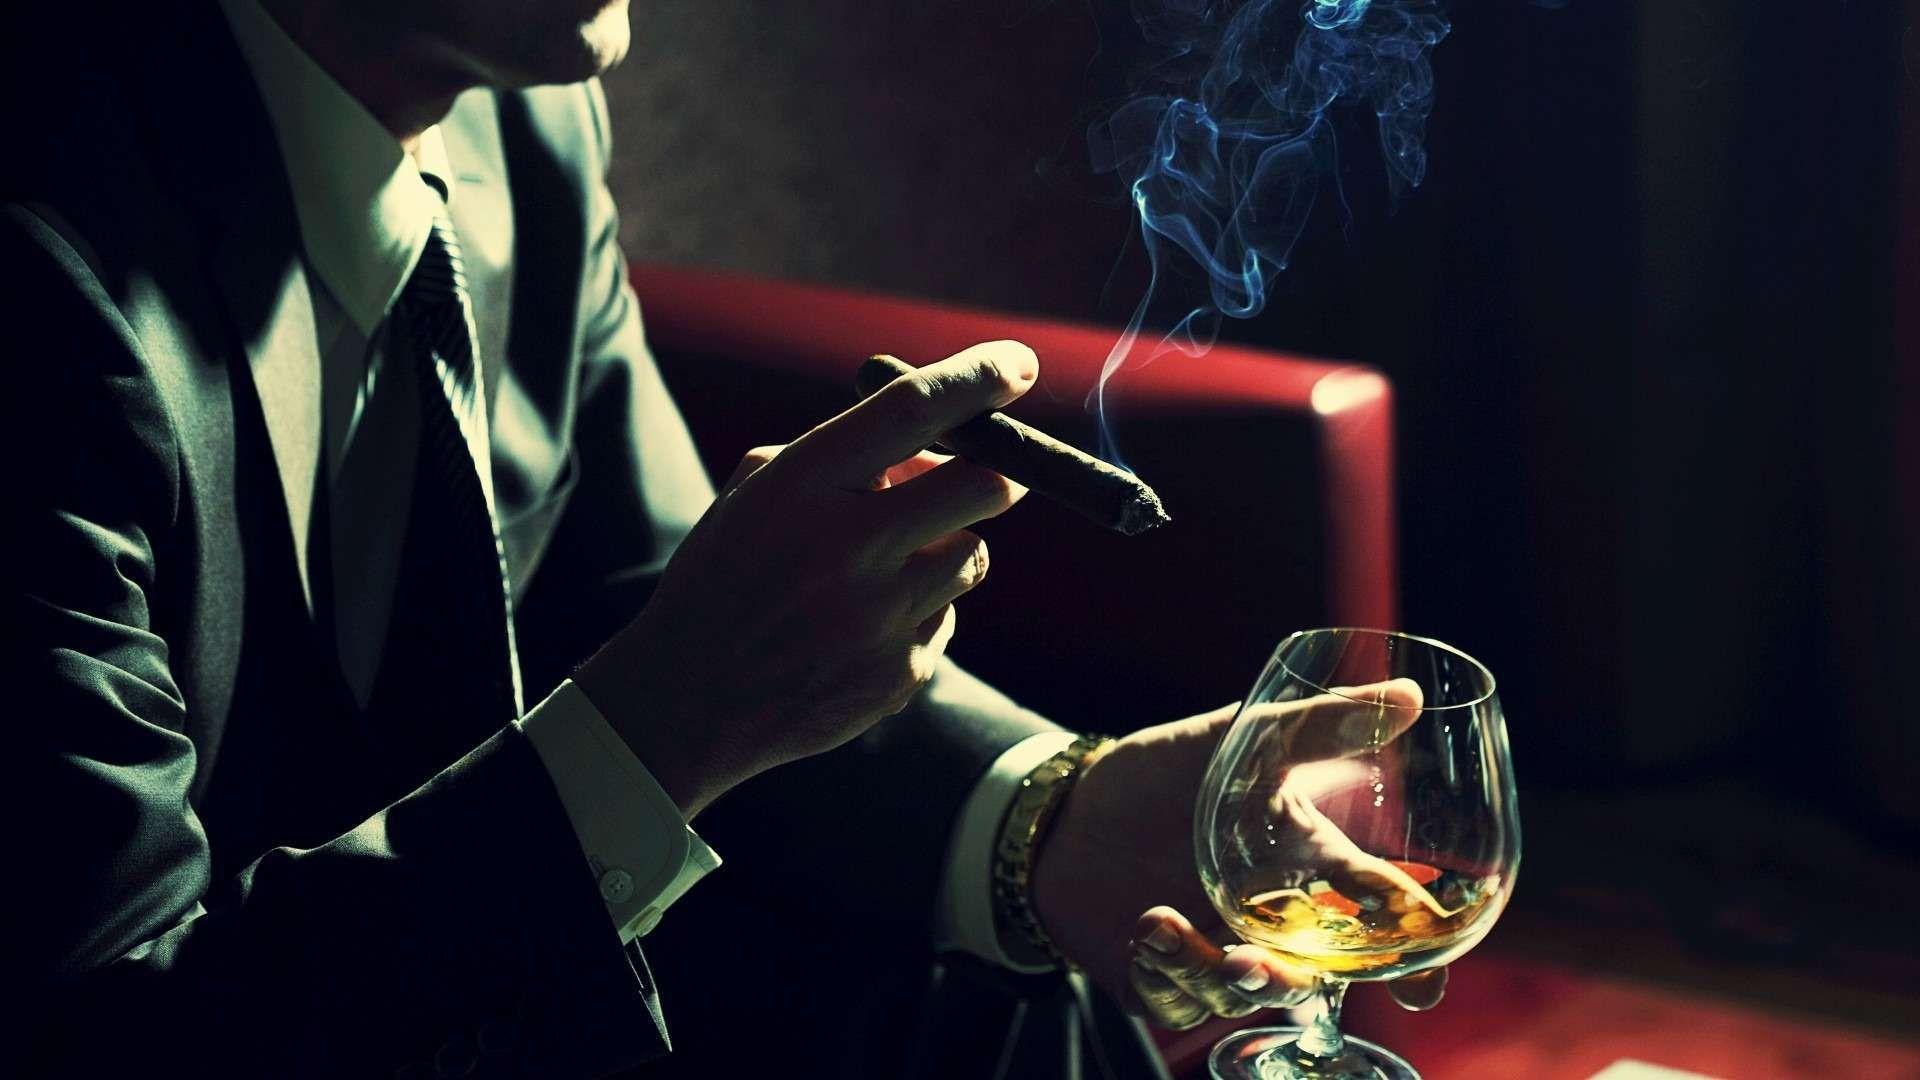 Smoking HD Wallpaper 1080p. Projects to Try. HD